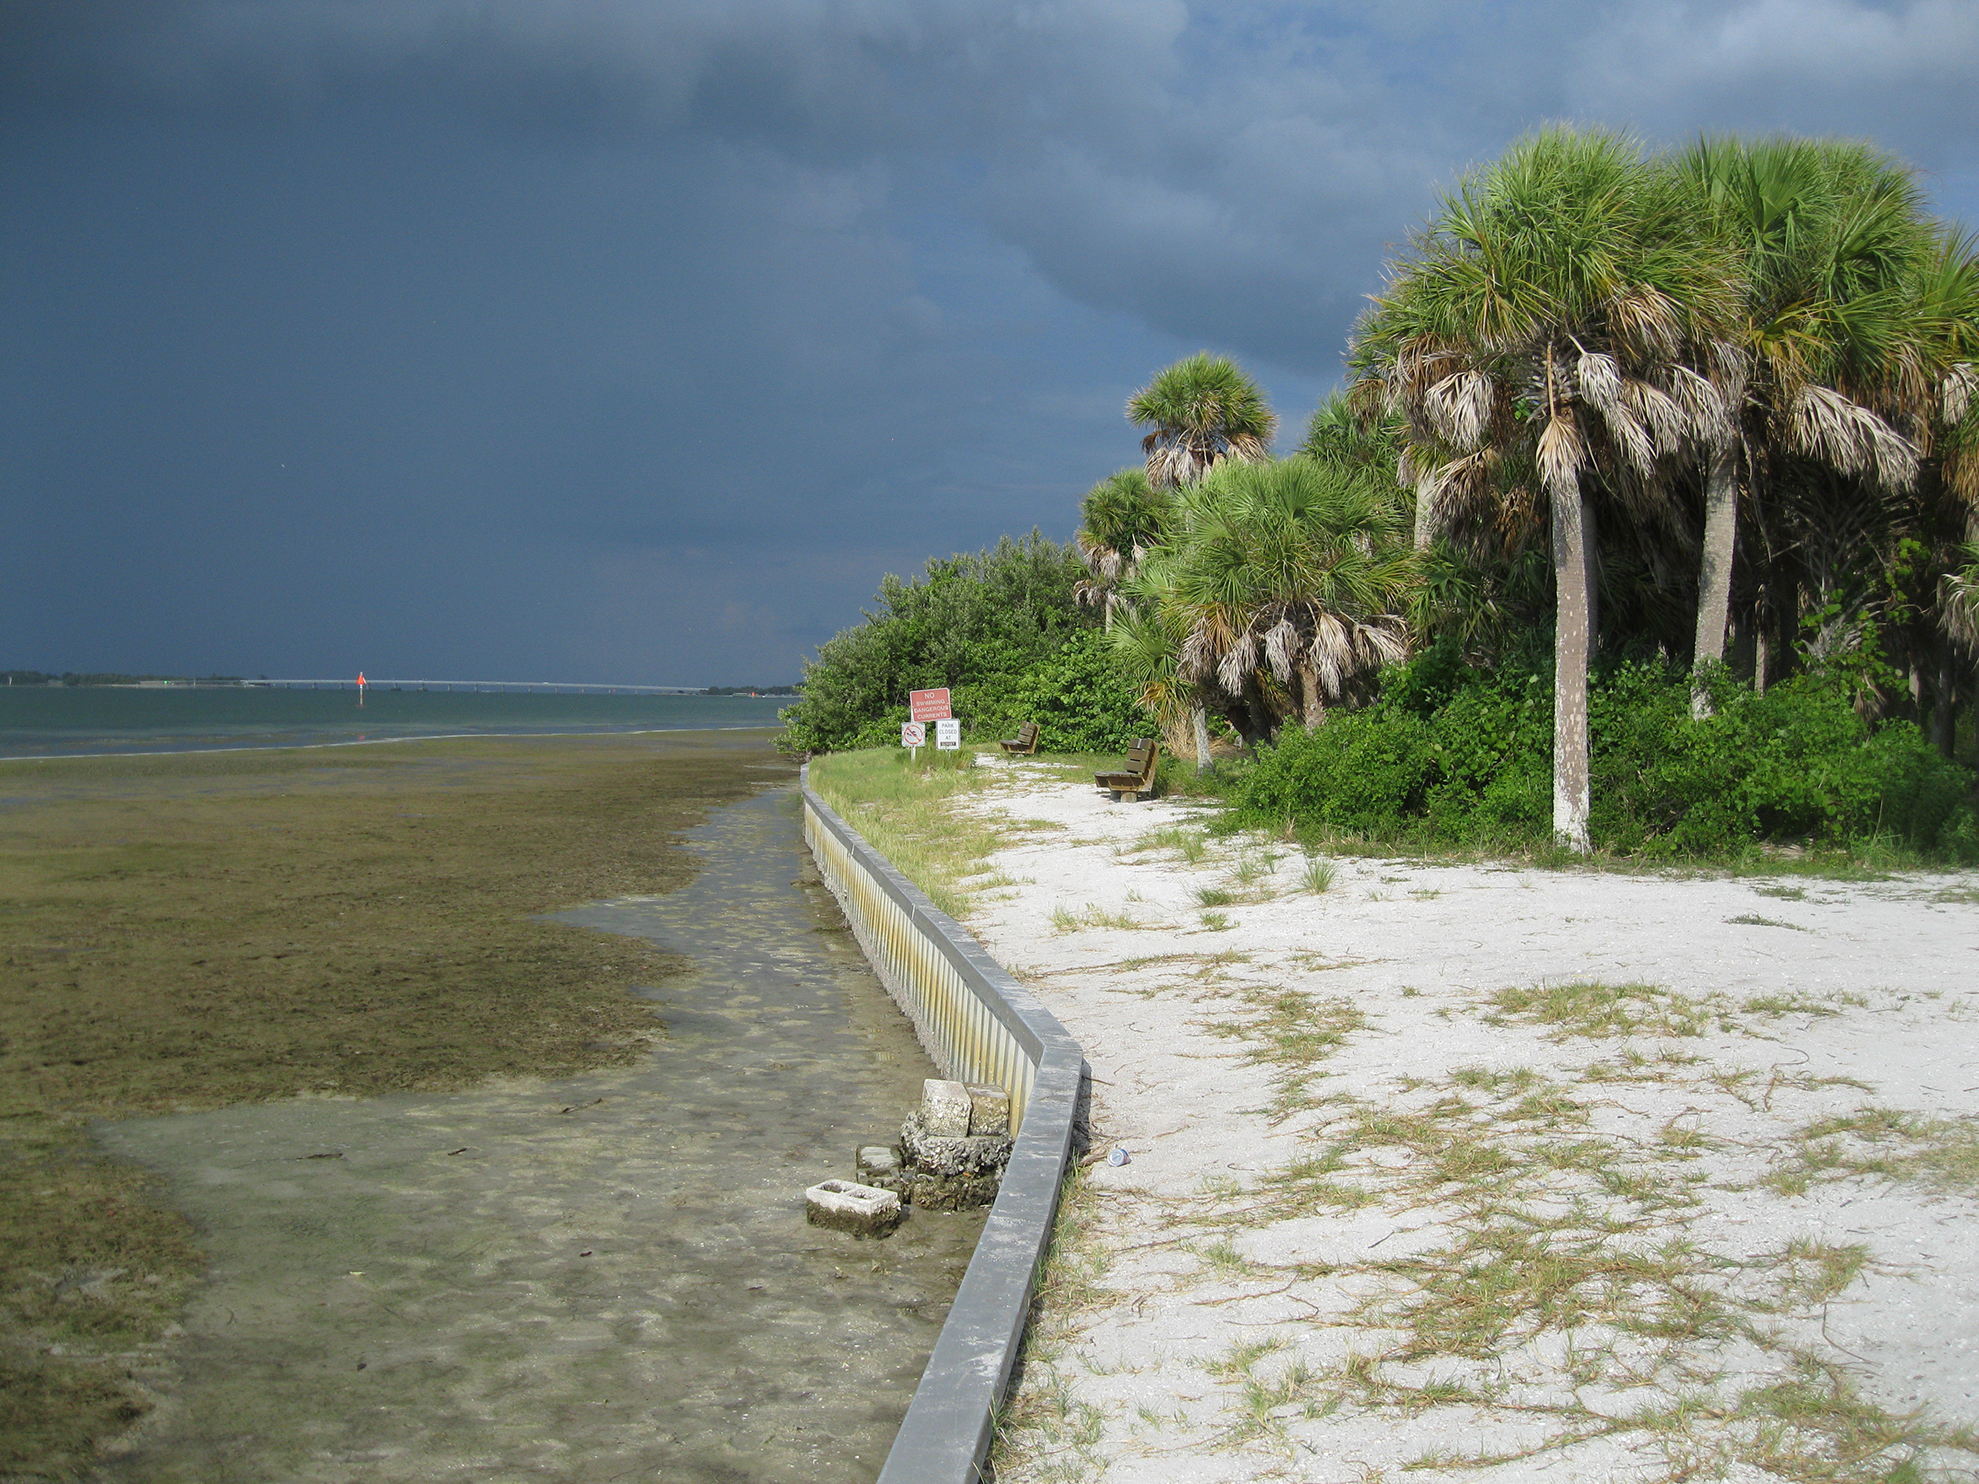 Bright beach with palm trees on right and dark storm clouds on left